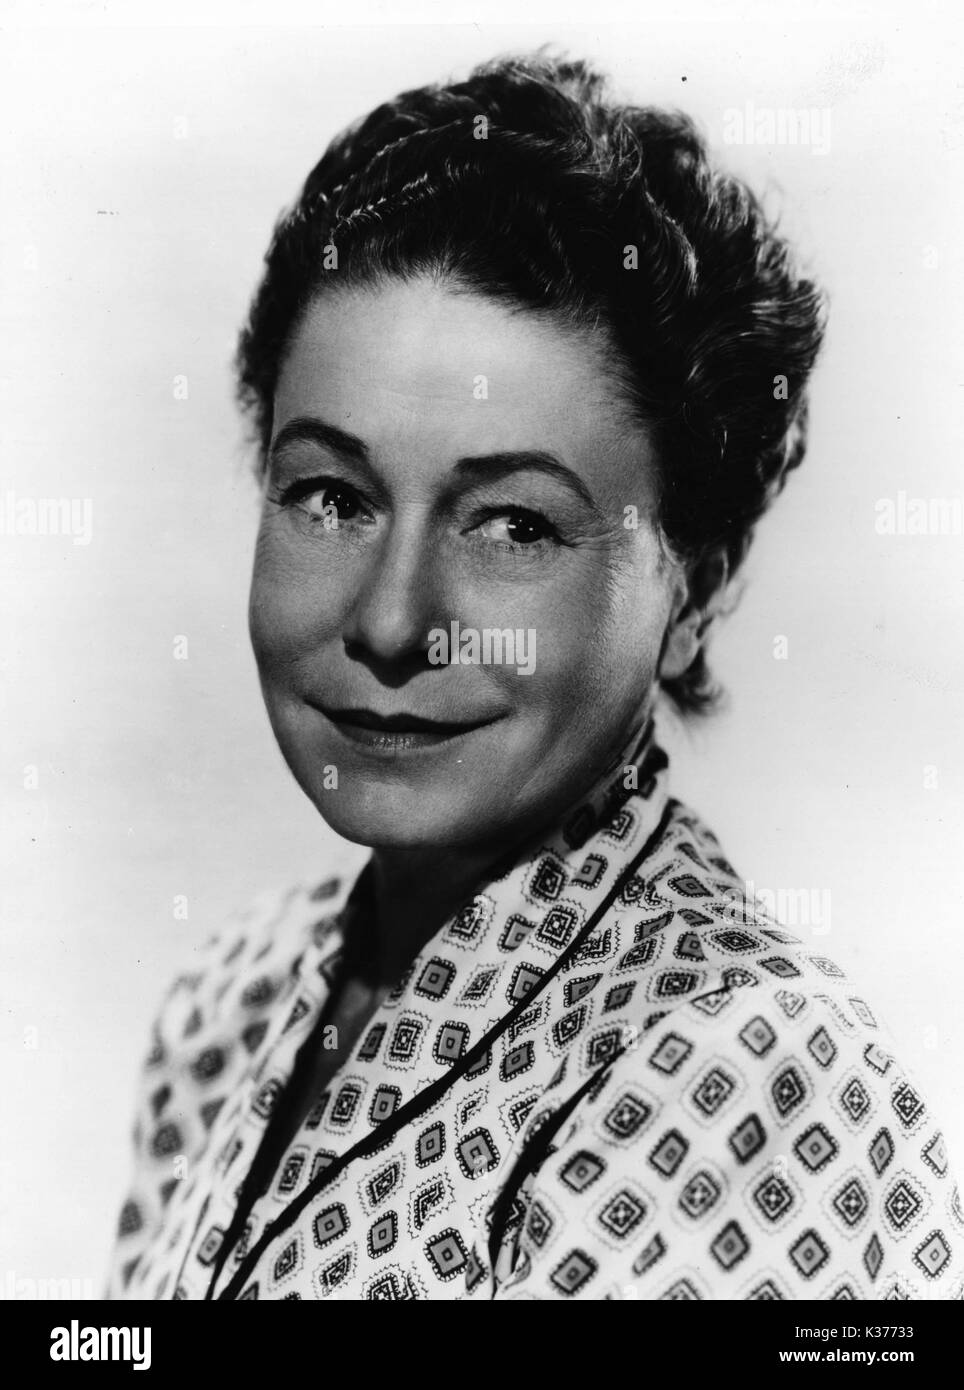 THELMA RITTER IN 1954 Stock Photo - Alamy